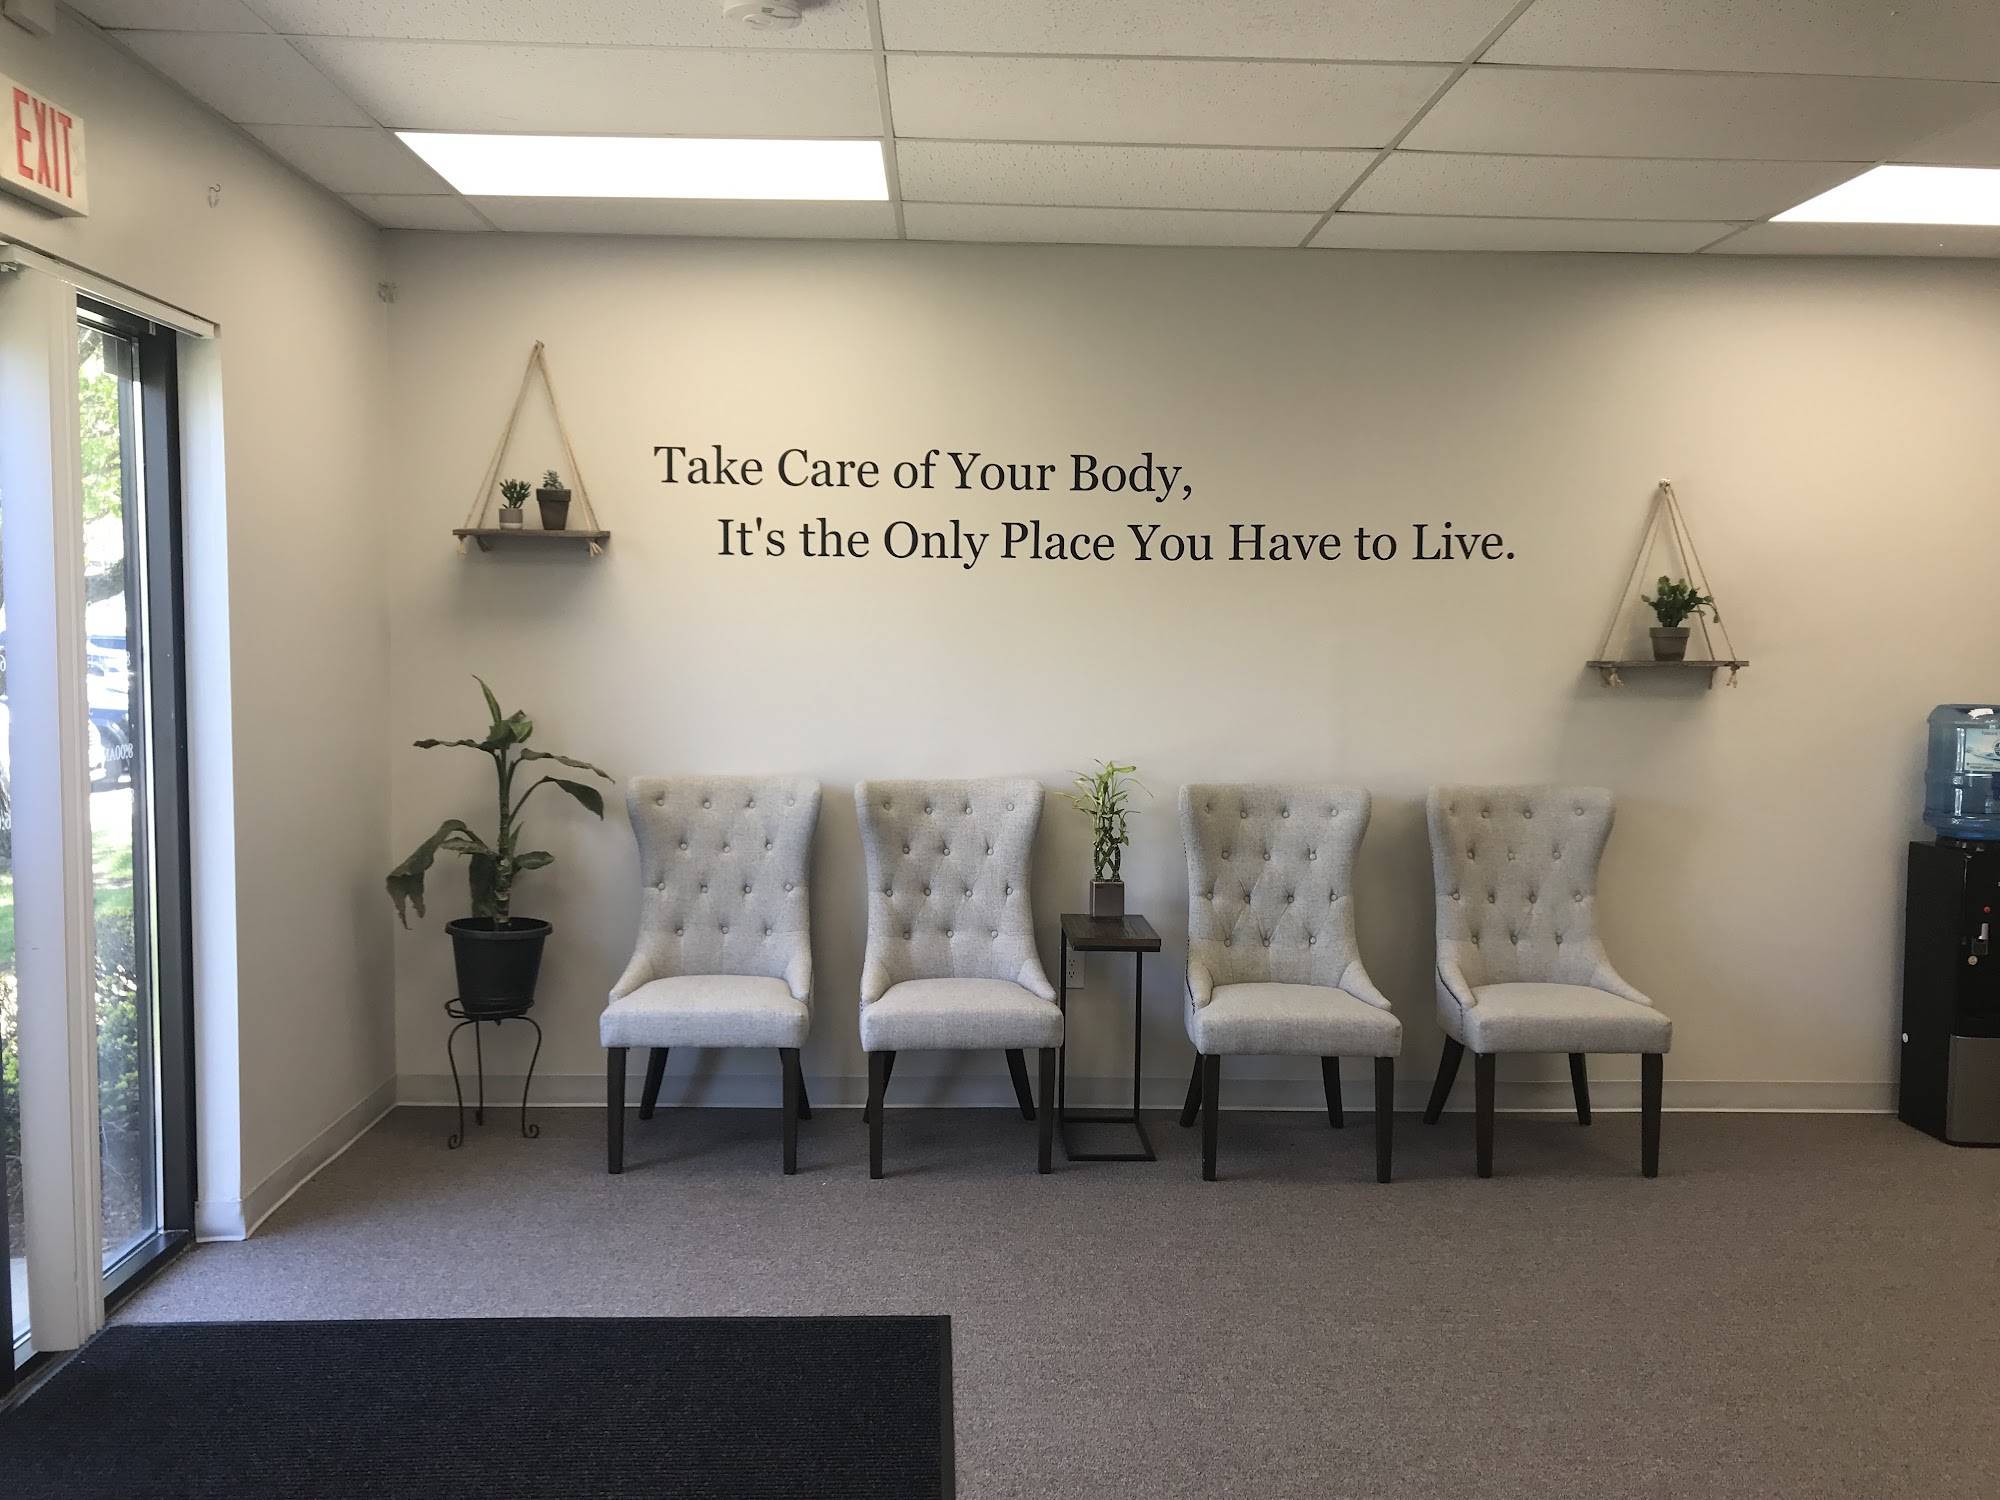 North River Family Chiropractic